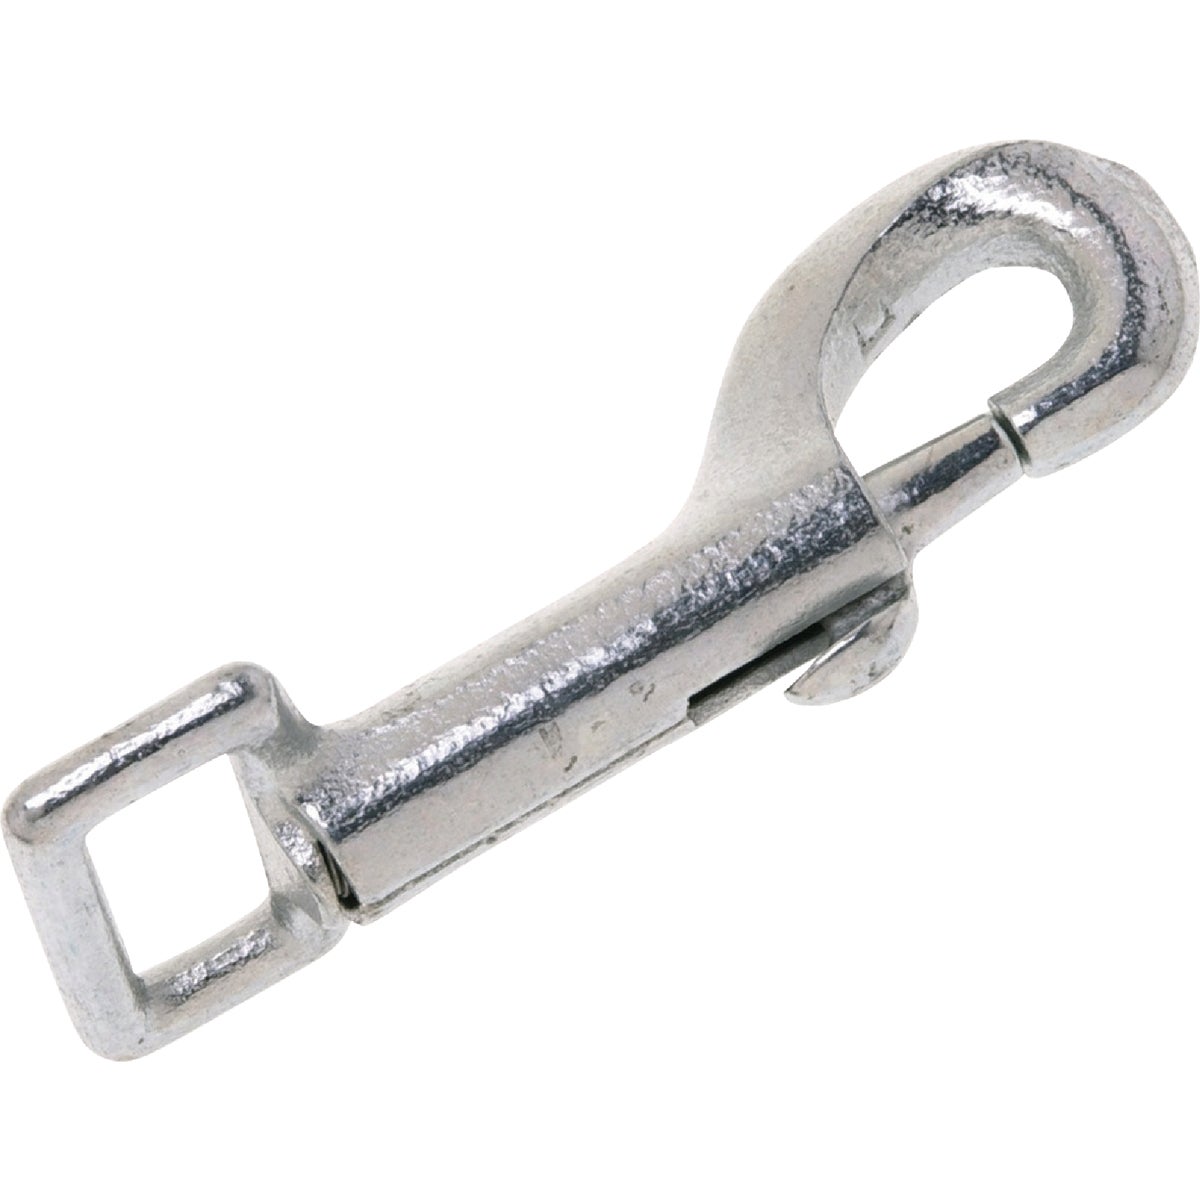 Item 769211, 1 In. rigid strap eye bolt snap. Overall length: 3-1/16 In.